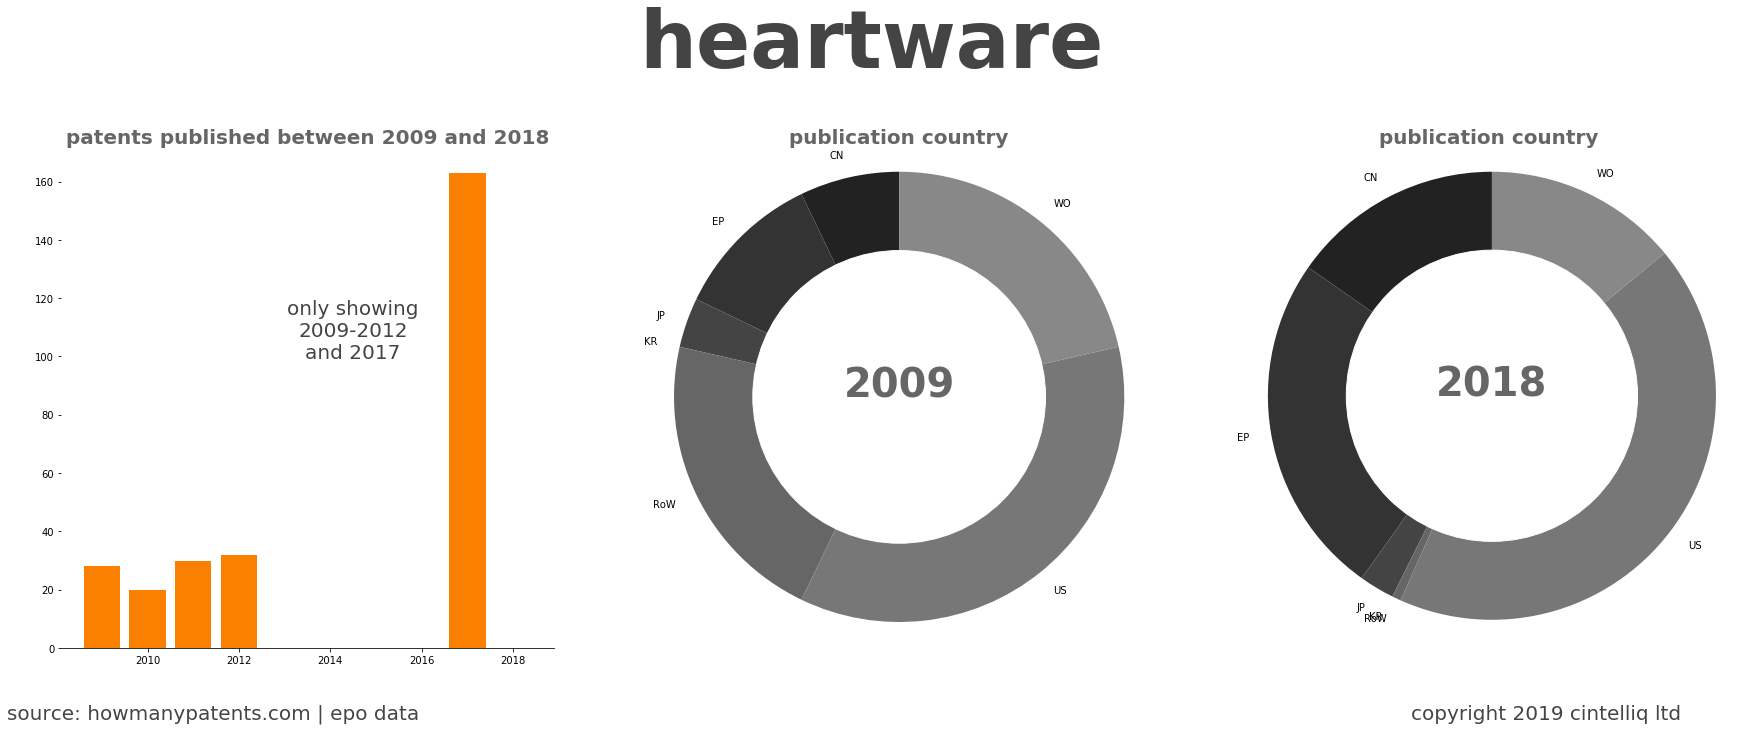 summary of patents for Heartware